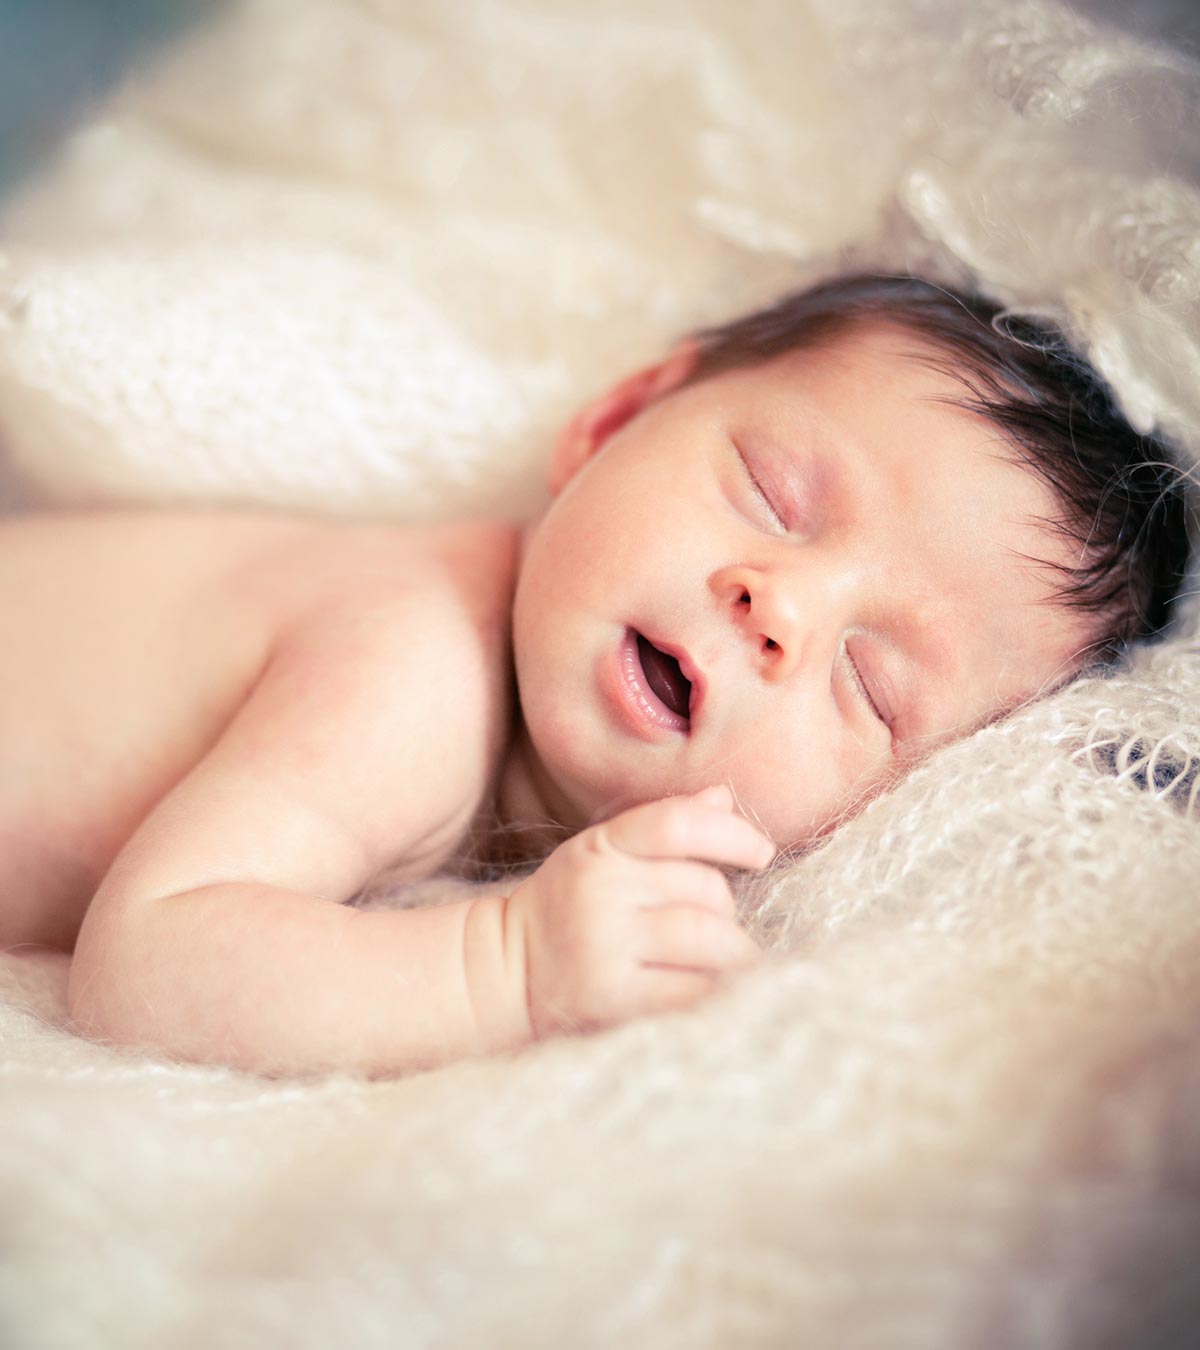 Baby Snoring: Signs, Causes, Tips To Control & When To Worry